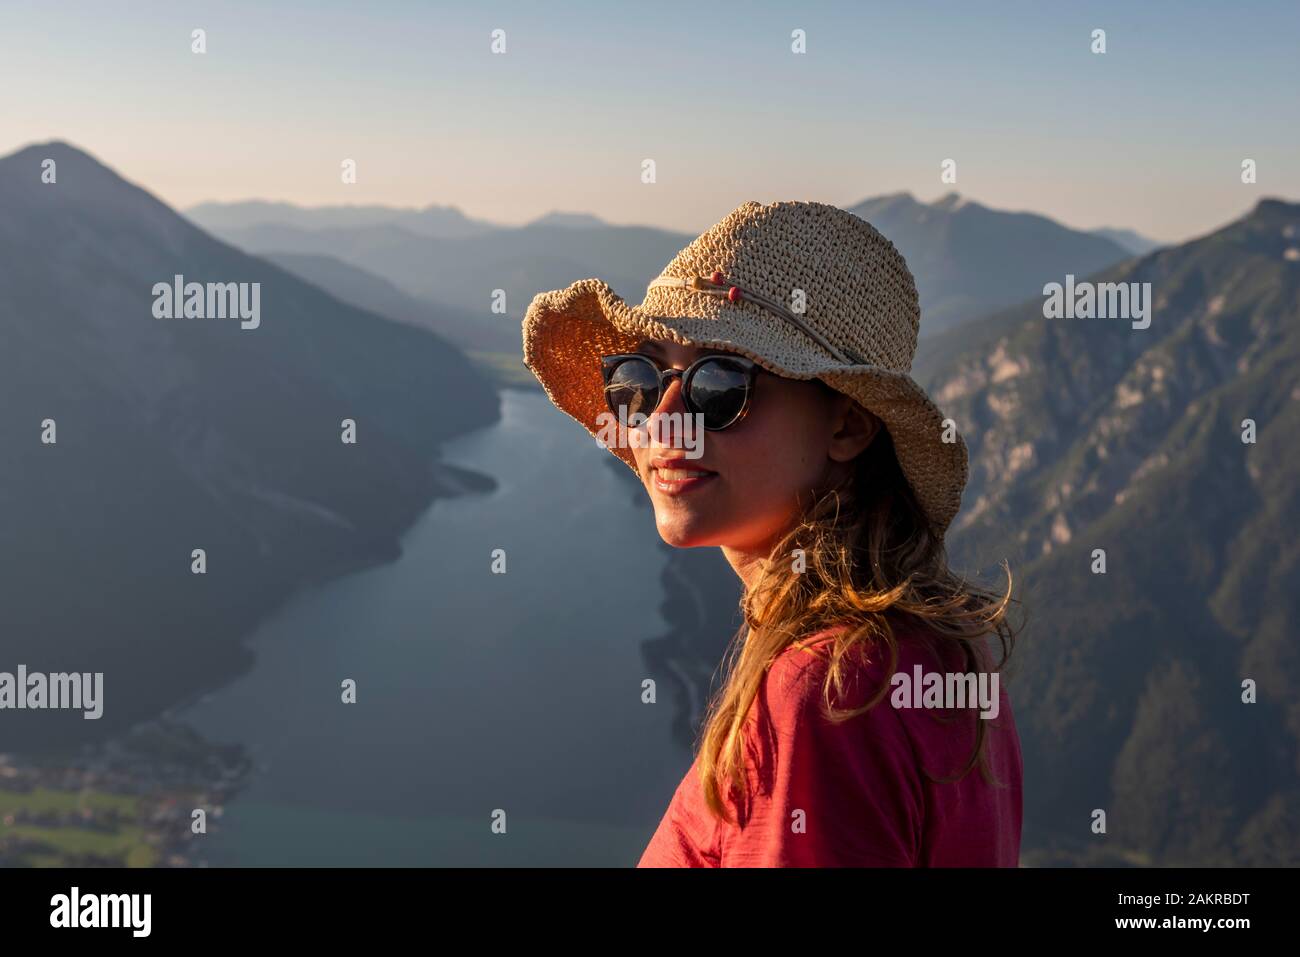 Young woman with sunglasses and sun hat, in the back mountain landscape with Lake Achensee, view from the mountain Baerenkopf, Tyrol, Austria Stock Photo